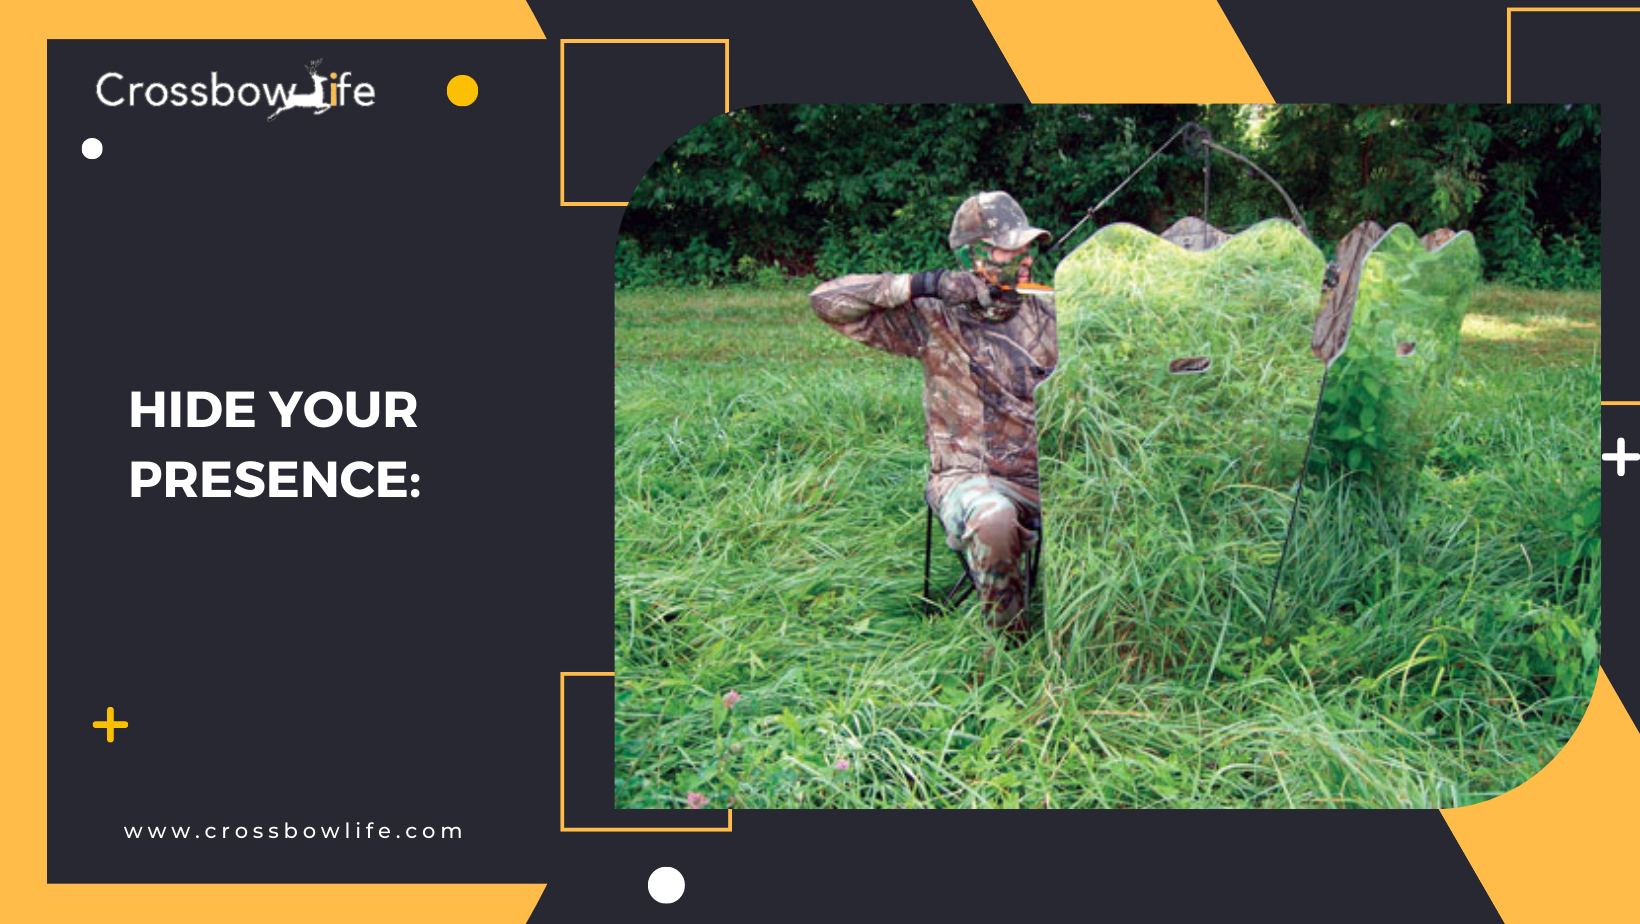 Best guide to hunting a turkey with a bow?